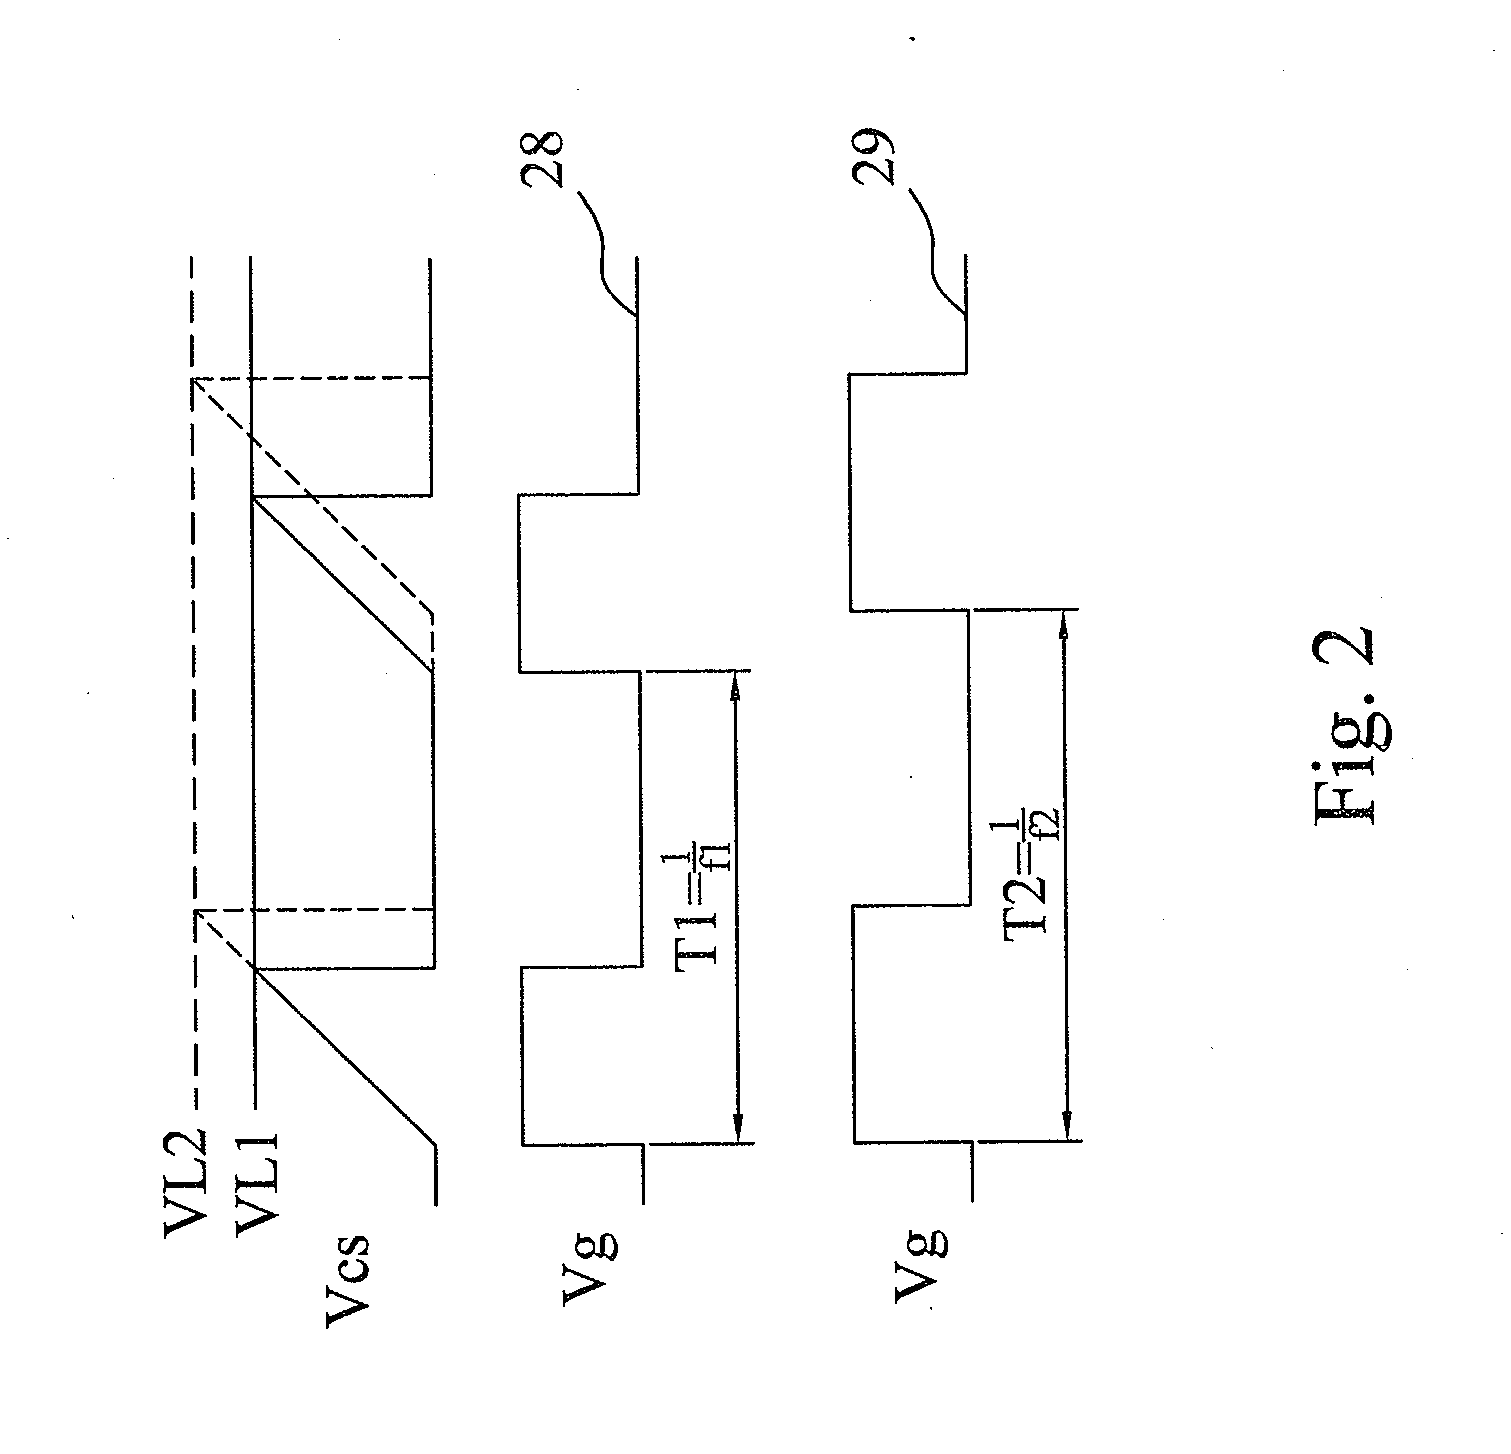 Frequency jittering control circuit and method for a pfm power supply